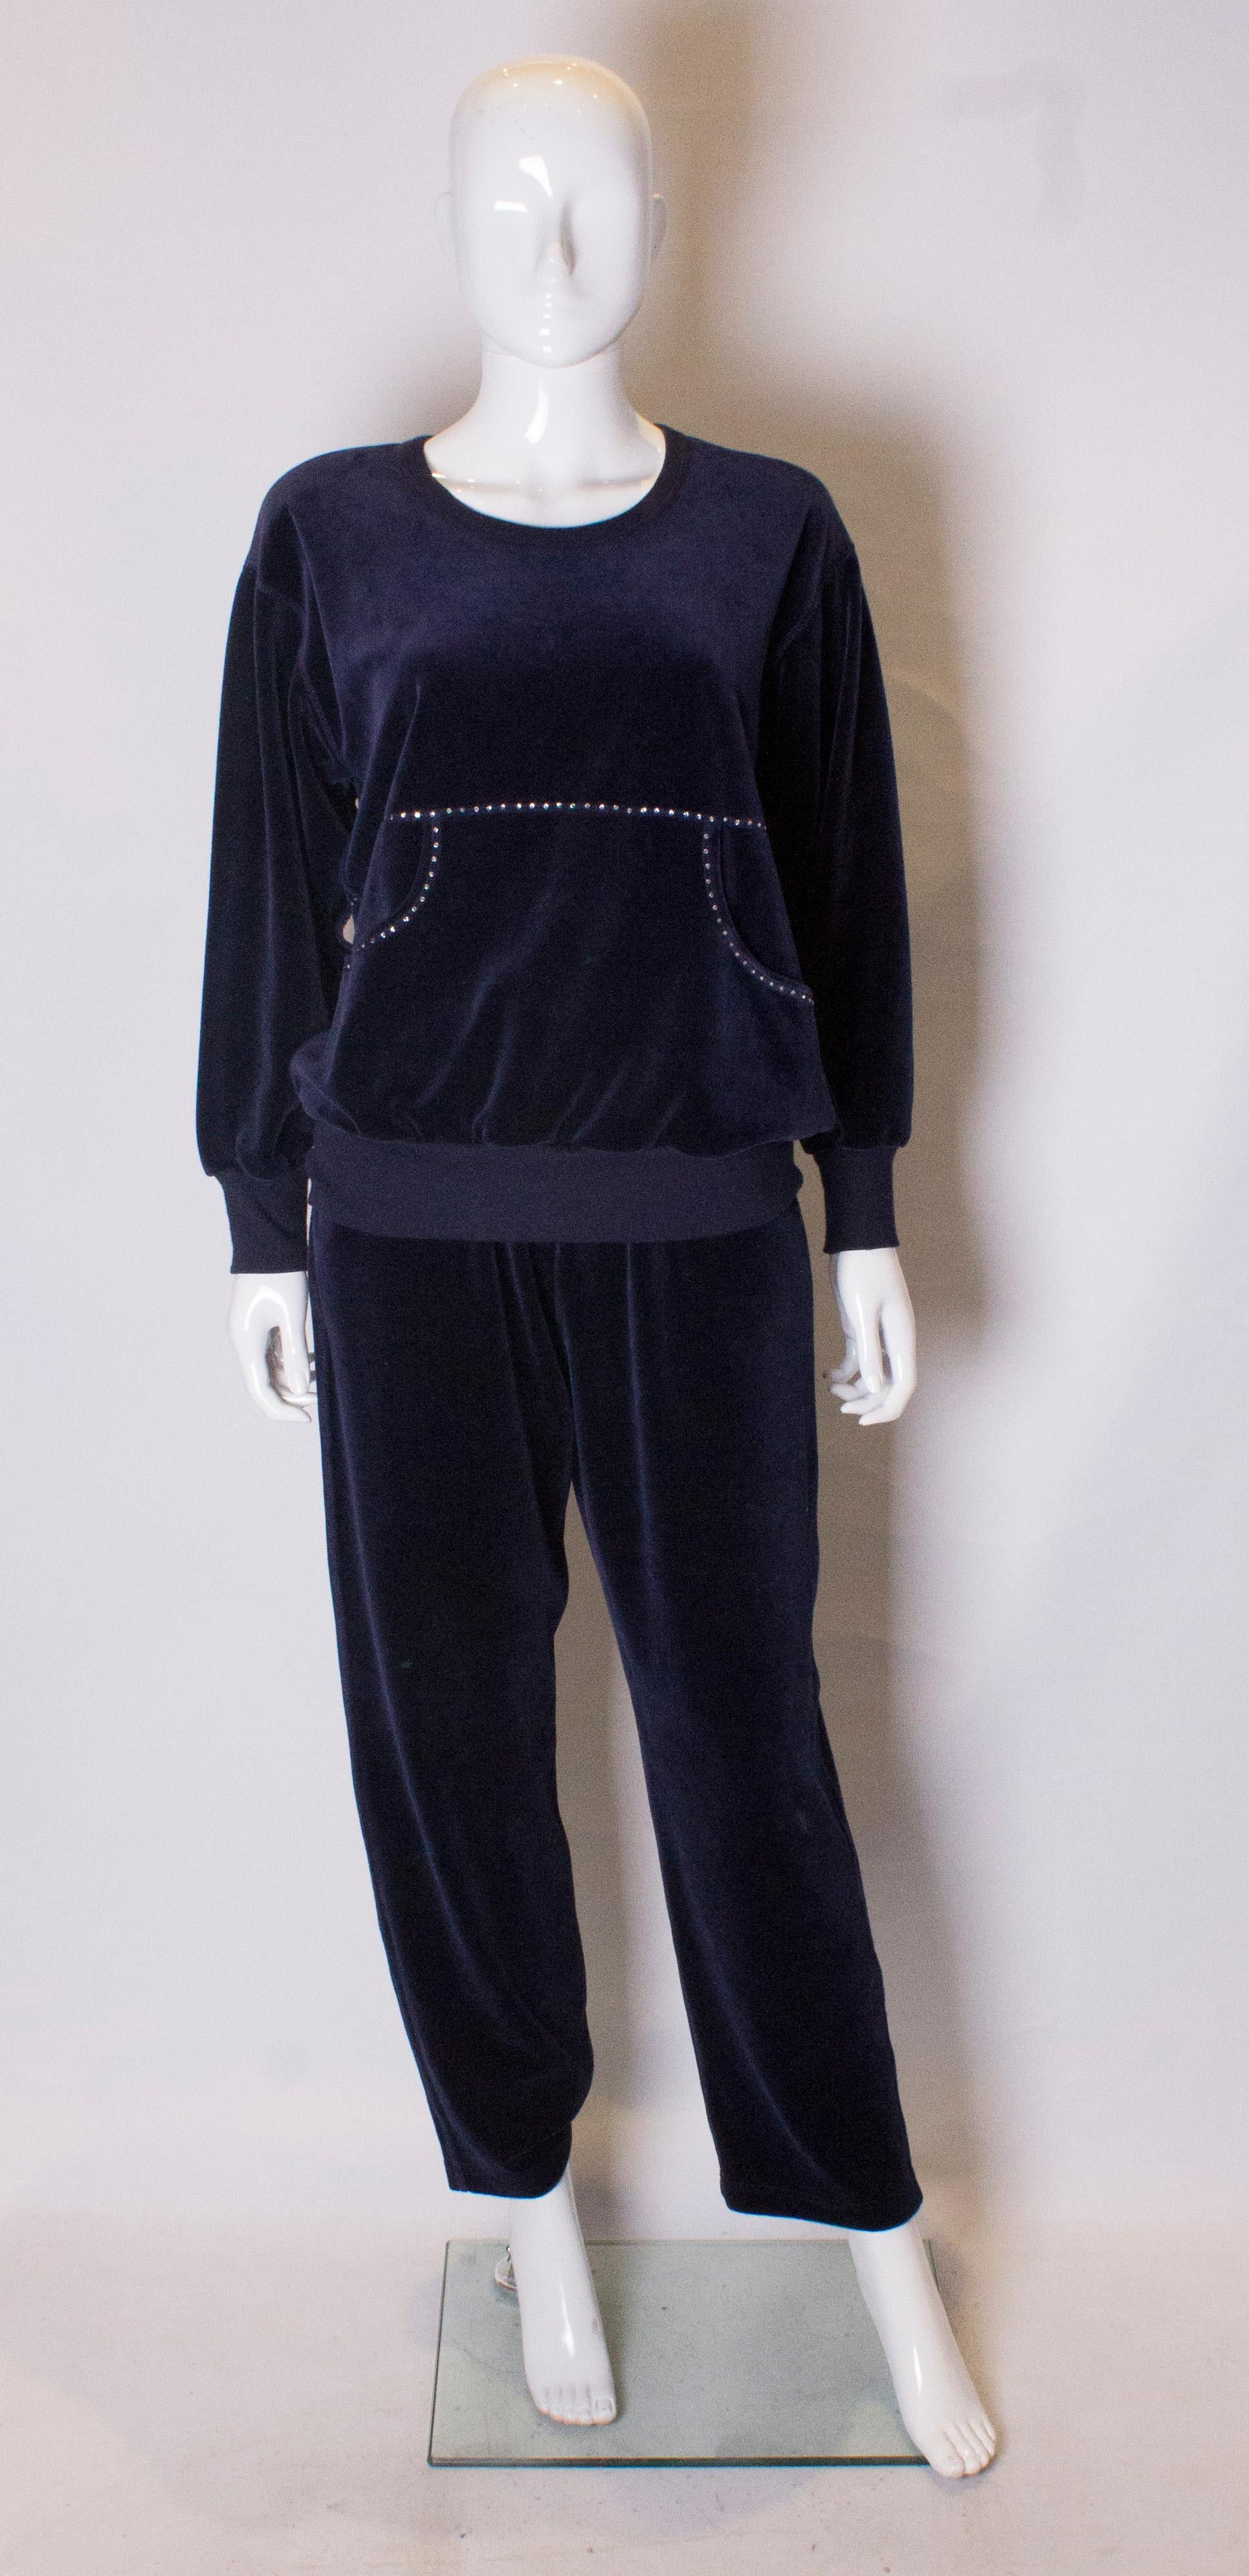 A super stylish leisure suit by Sonia Rykiel. The suit is in a deep blue velour , with two pouch pockets at the front. The top has a scoop round neck and diamante detail at the front and back. The trousers have an elasticated waist and two pockets